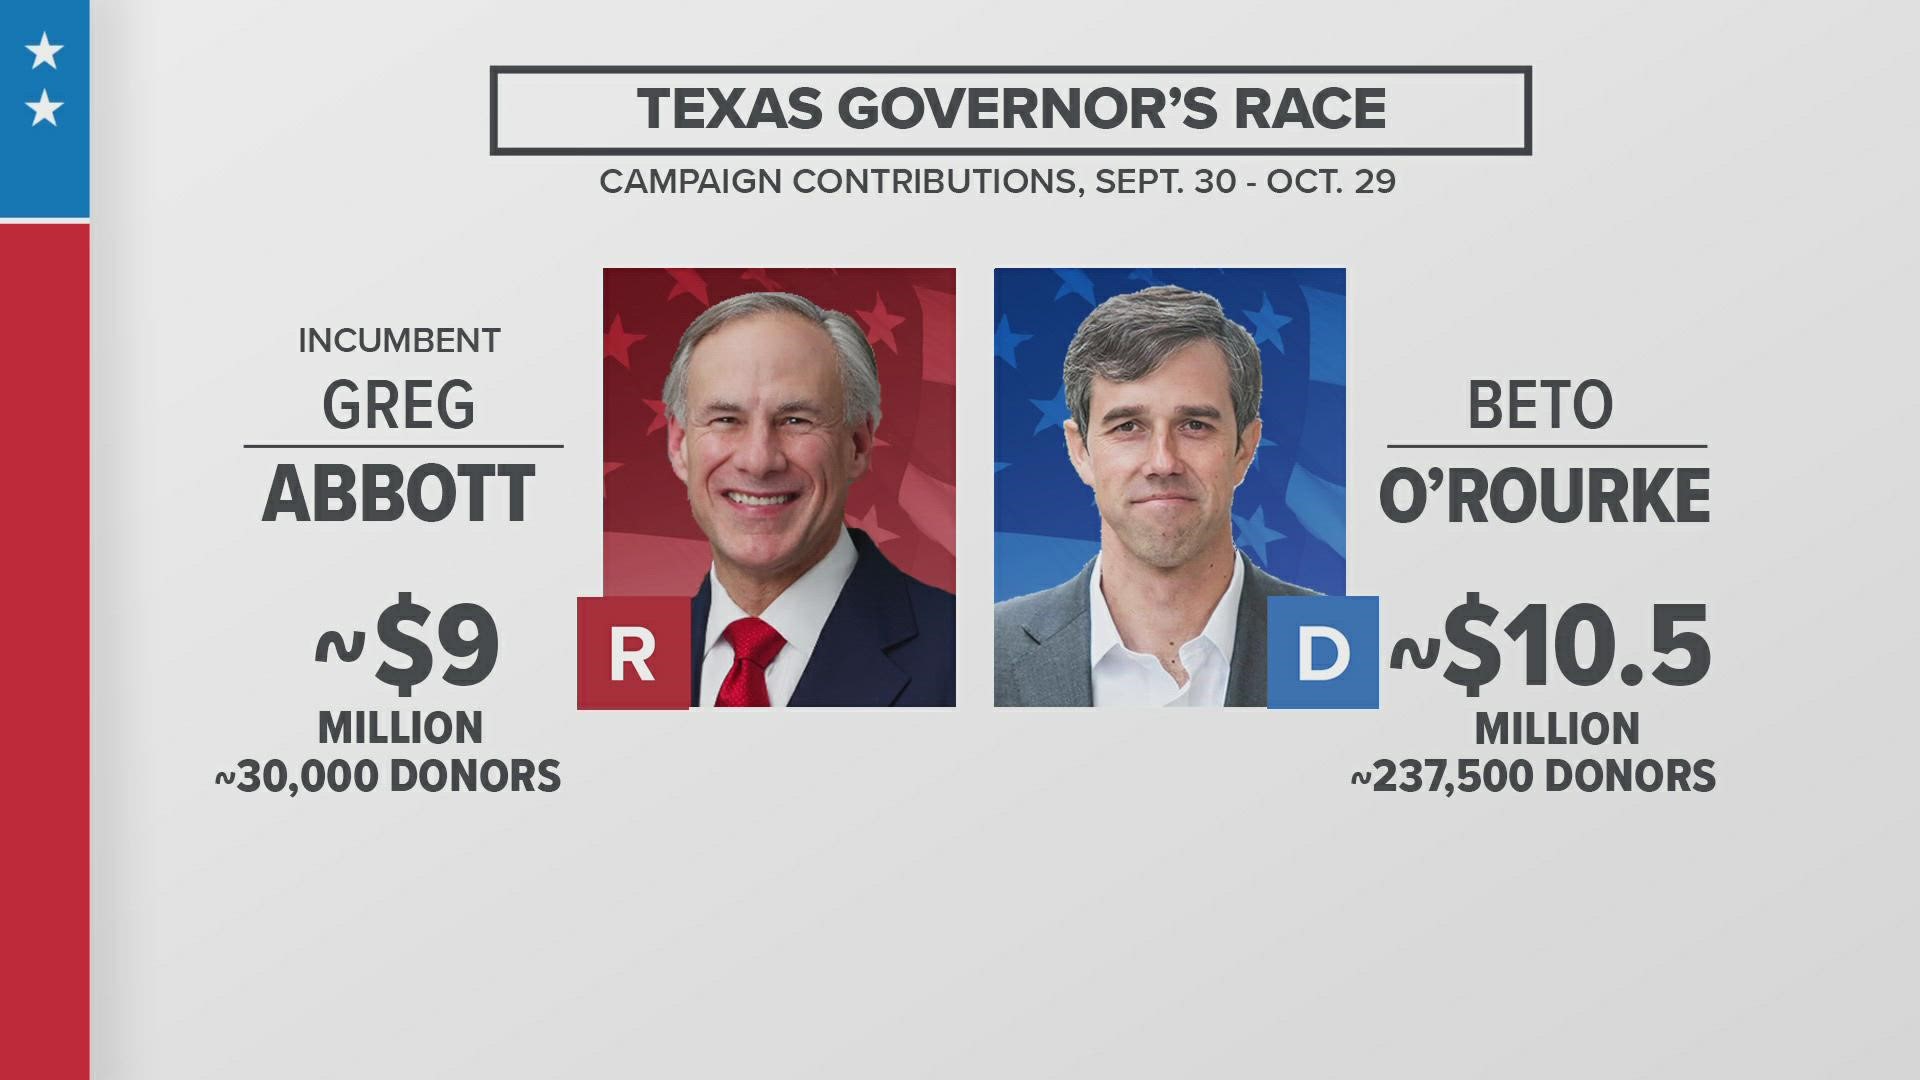 The latest report shows that Abbott raised $9 million in October while O'Rourke raised $10.5 million during that same period.